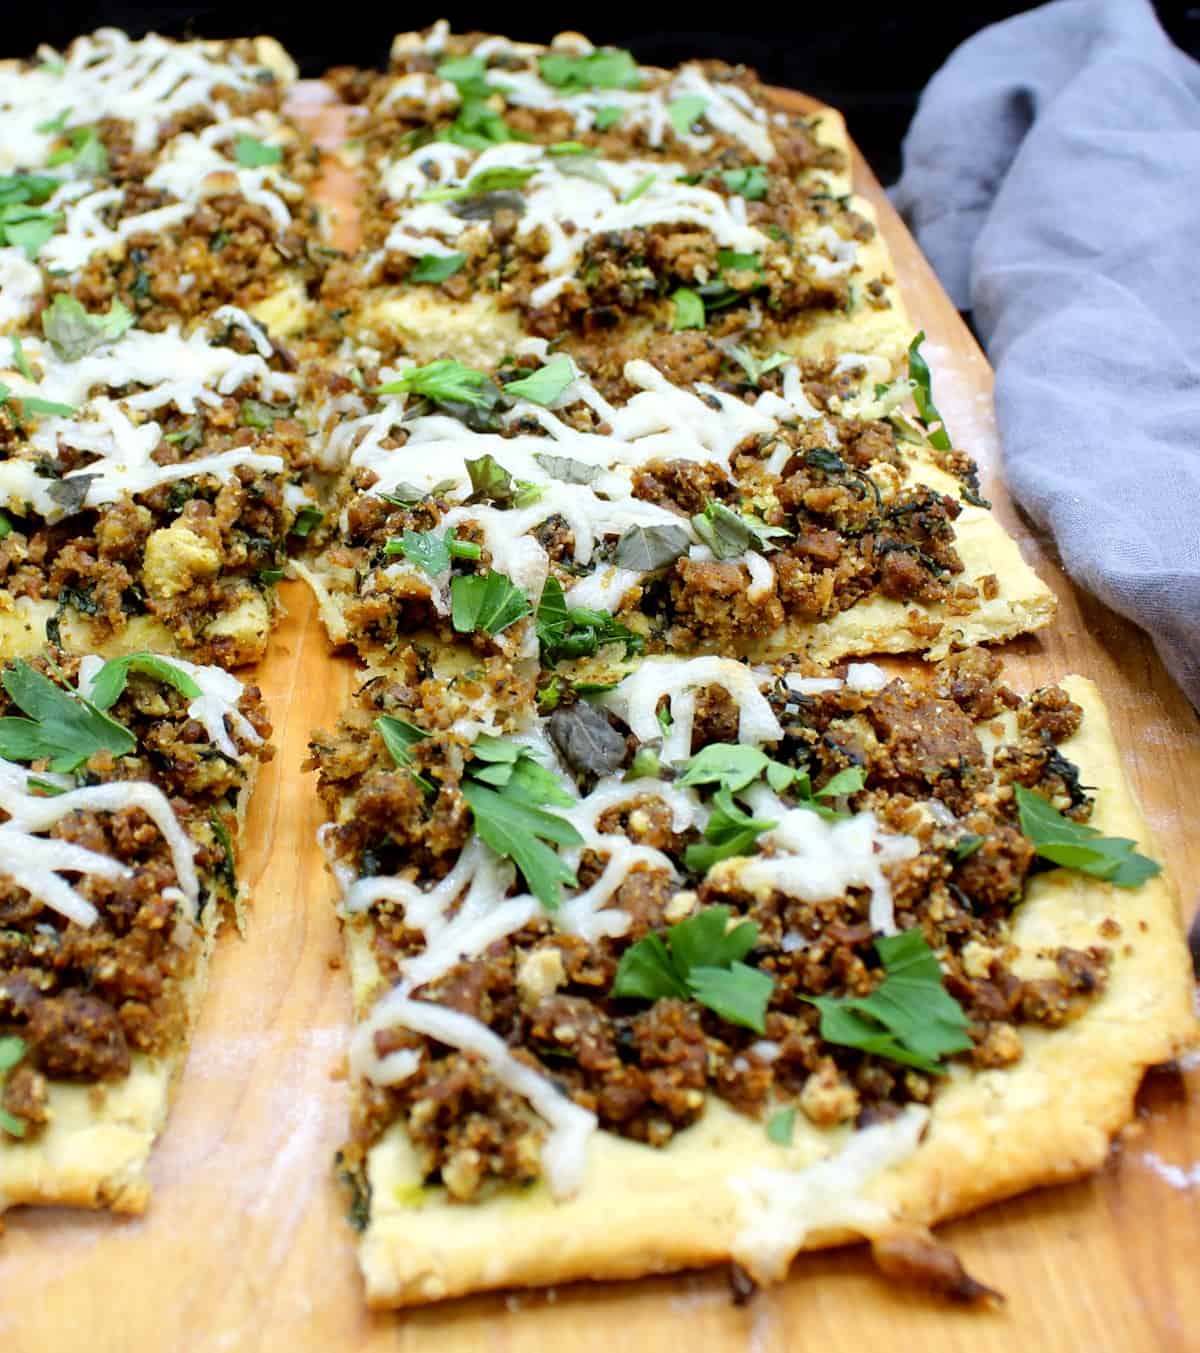 Slices of vegan breakfast sausage pizza with a biscuit crust with cheese and parsley and other herbs on a chopping board.